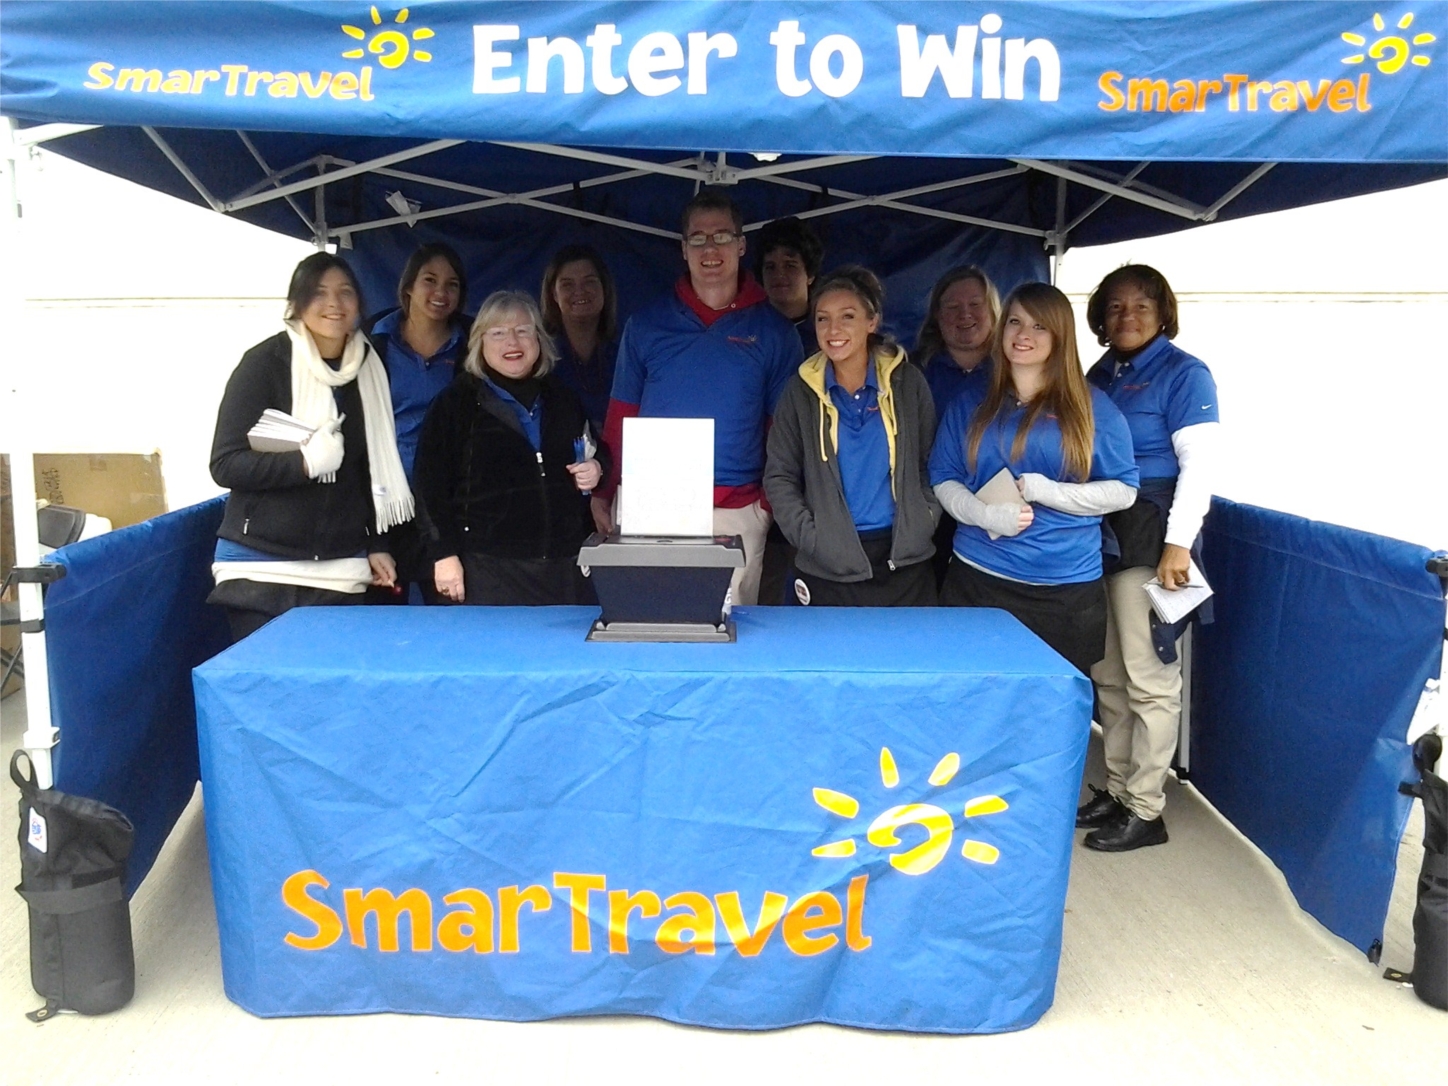 Our SmarTravel marketing team members work events throughout the city all year long.